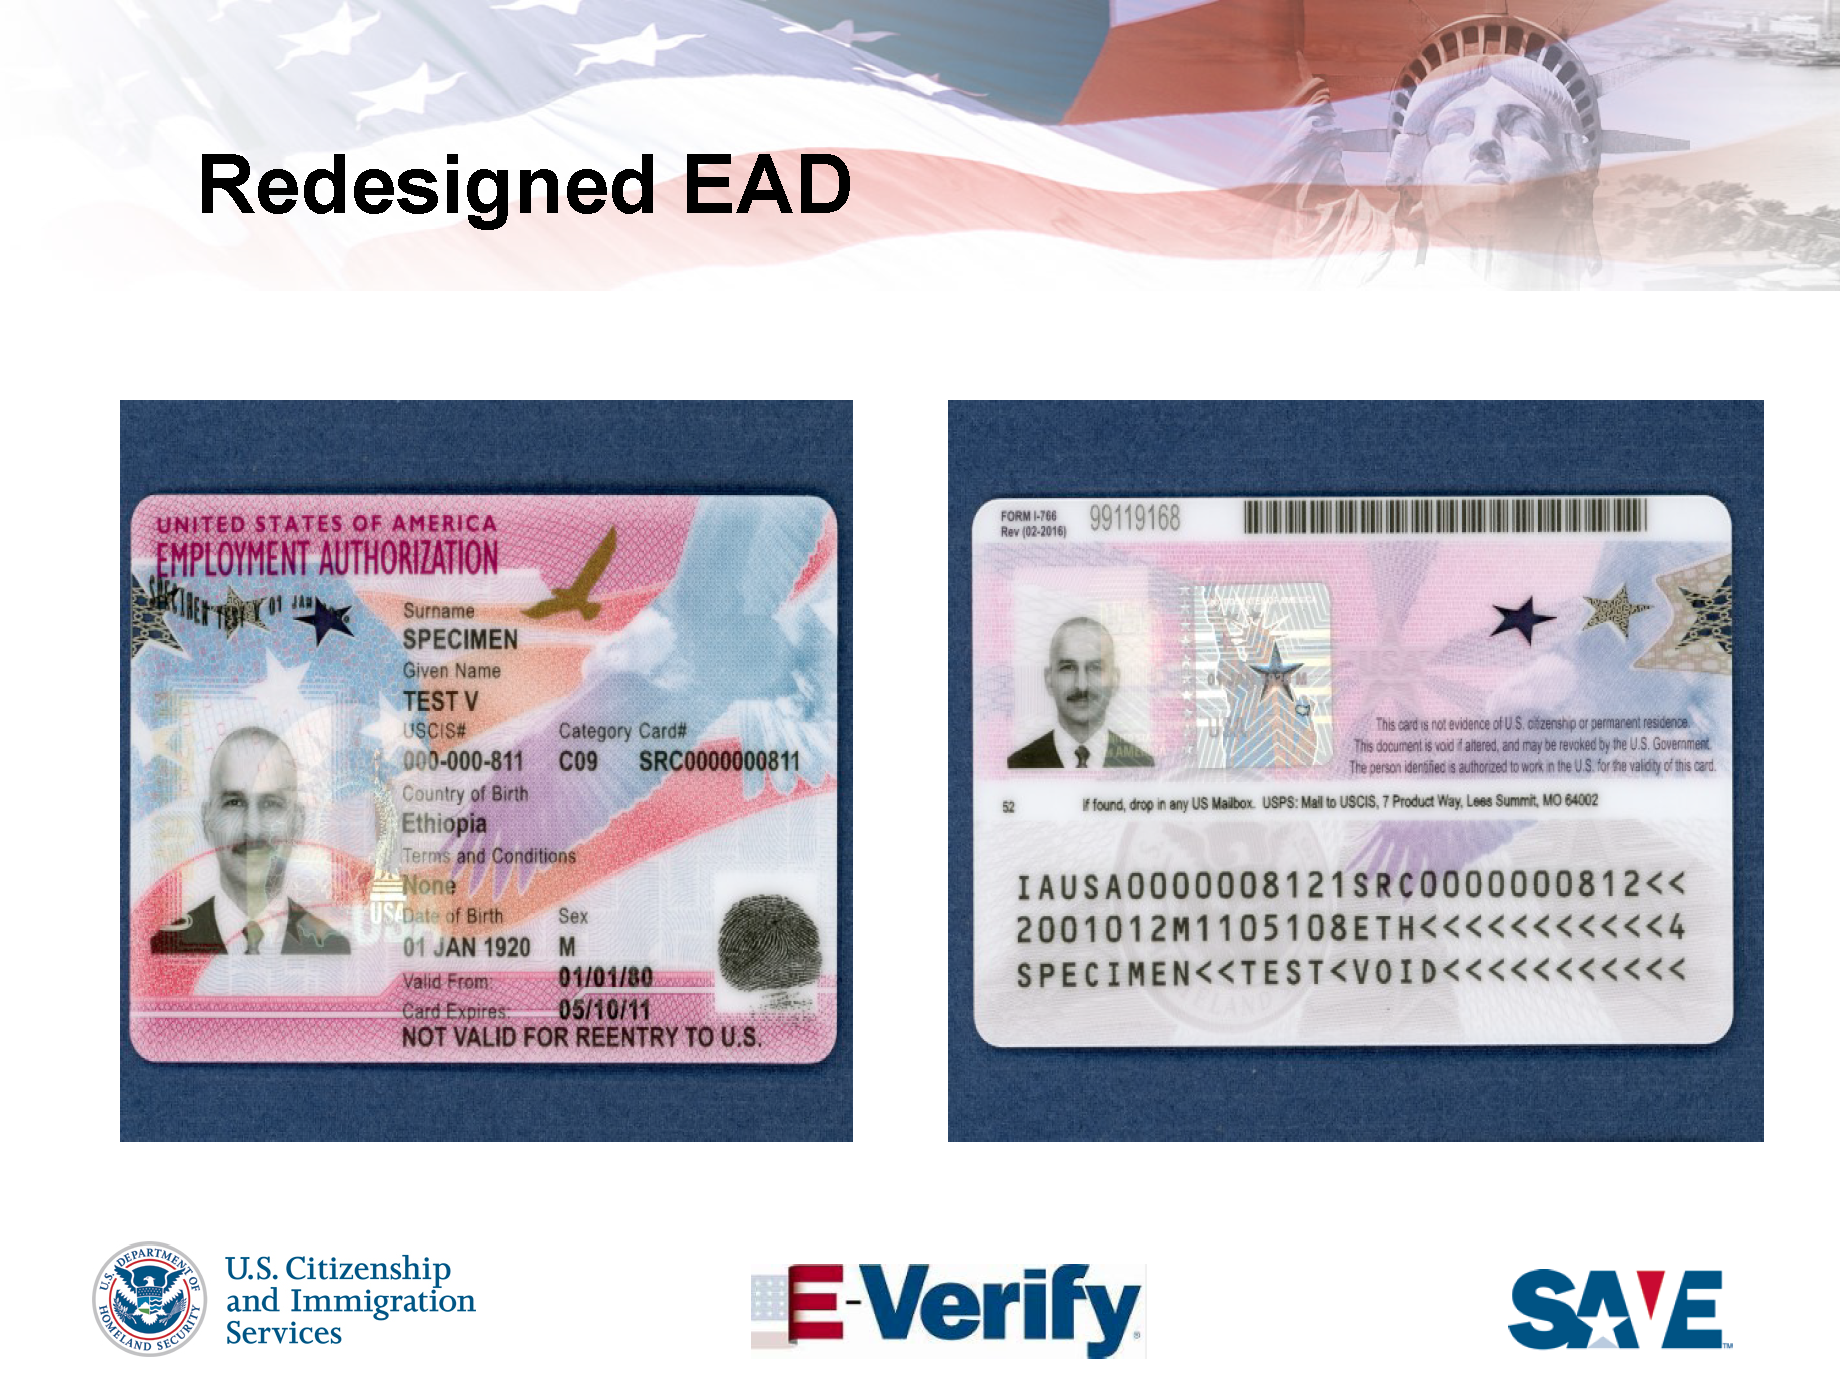 Uscis Powerpoint On Redesigned Green Card And Employment